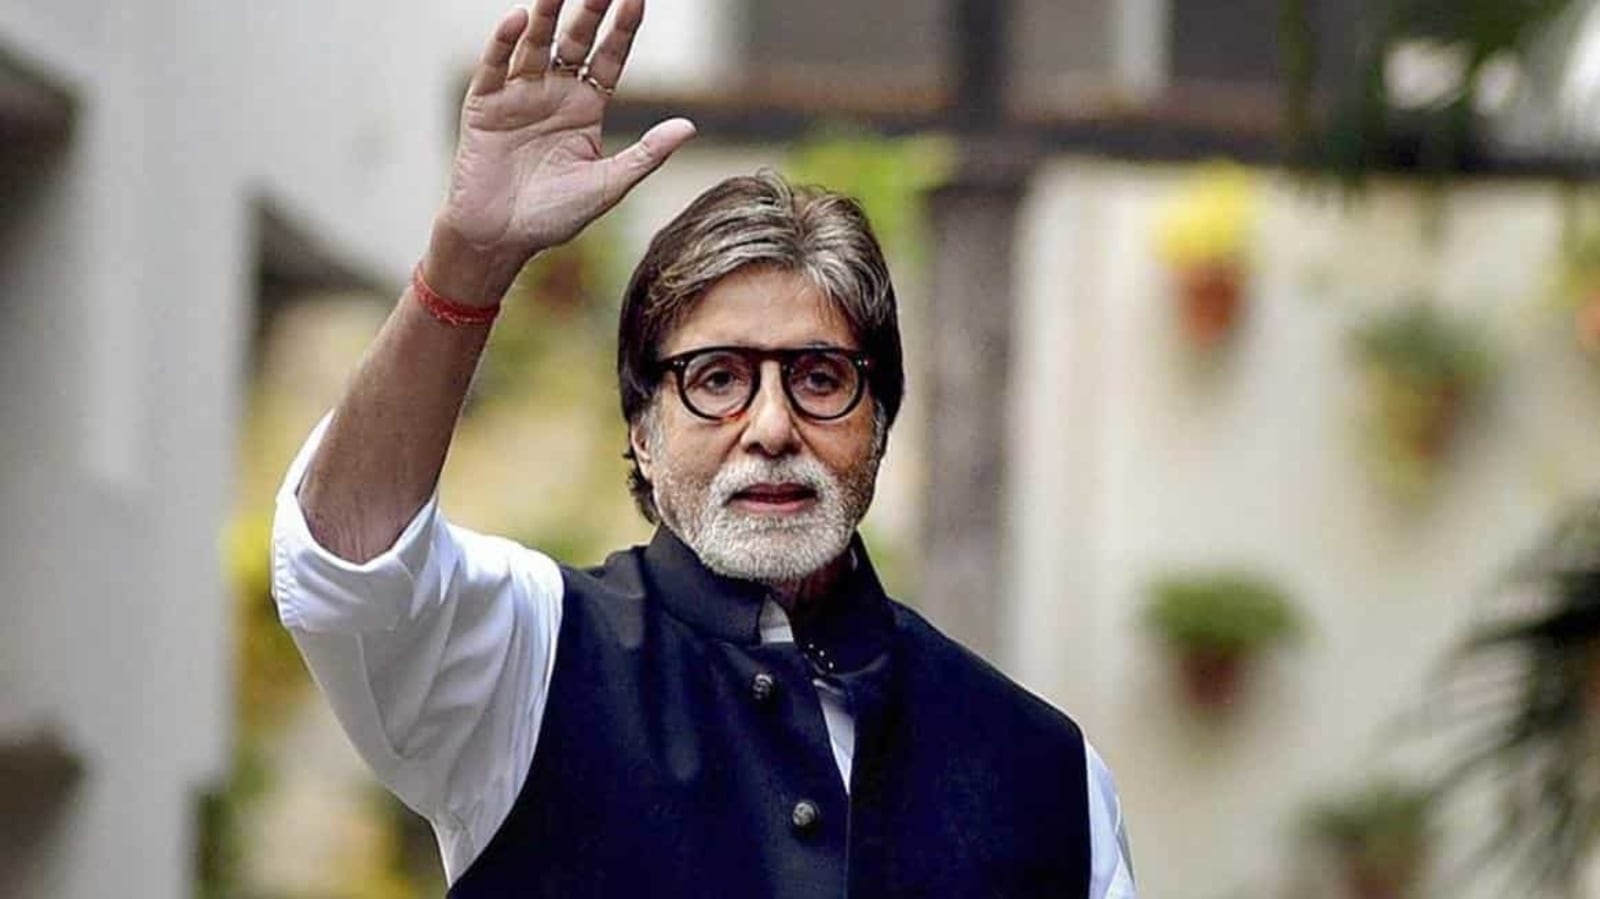 Amitabh Bachchan shuts down 'everyday abuse', lists down all his charitable  efforts, says it's 'embarrassing' | Bollywood - Hindustan Times